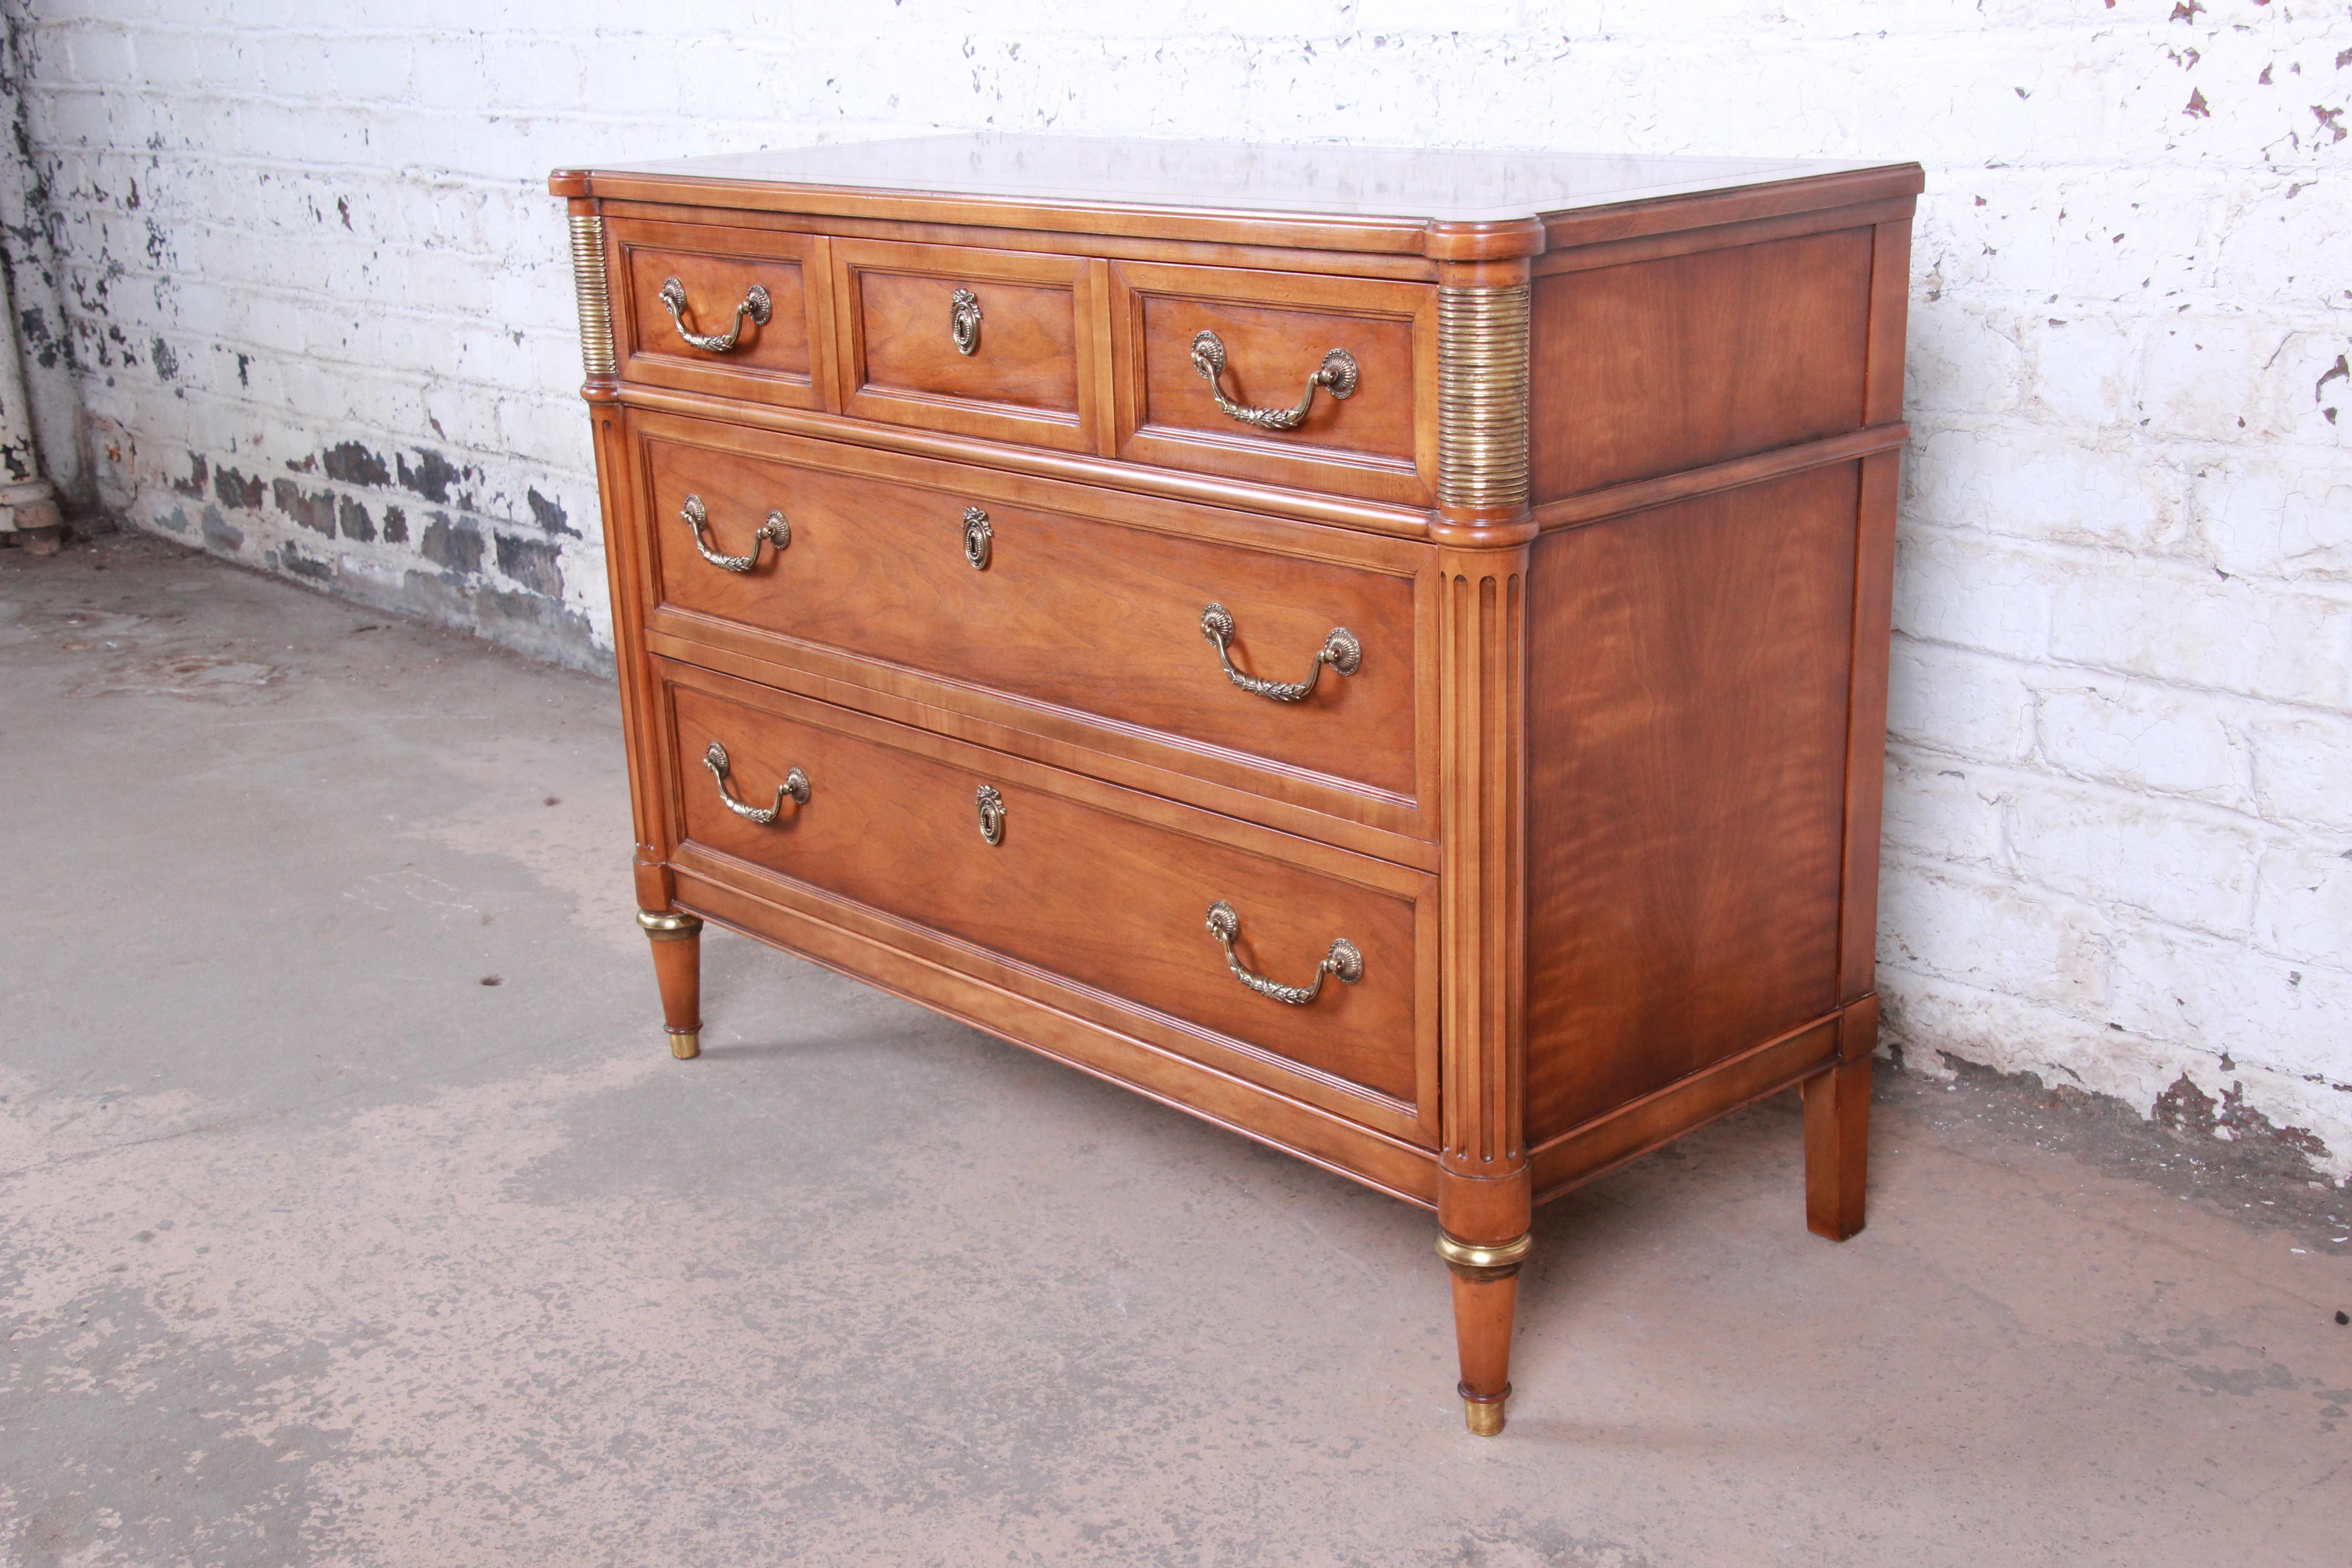 A gorgeous Louis XVI style French Regency three-drawer bachelor chest of drawers by Baker Furniture. The dresser features beautiful walnut wood grain and nice brass details. It offers good storage, with three deep dovetailed drawers. All hardware is